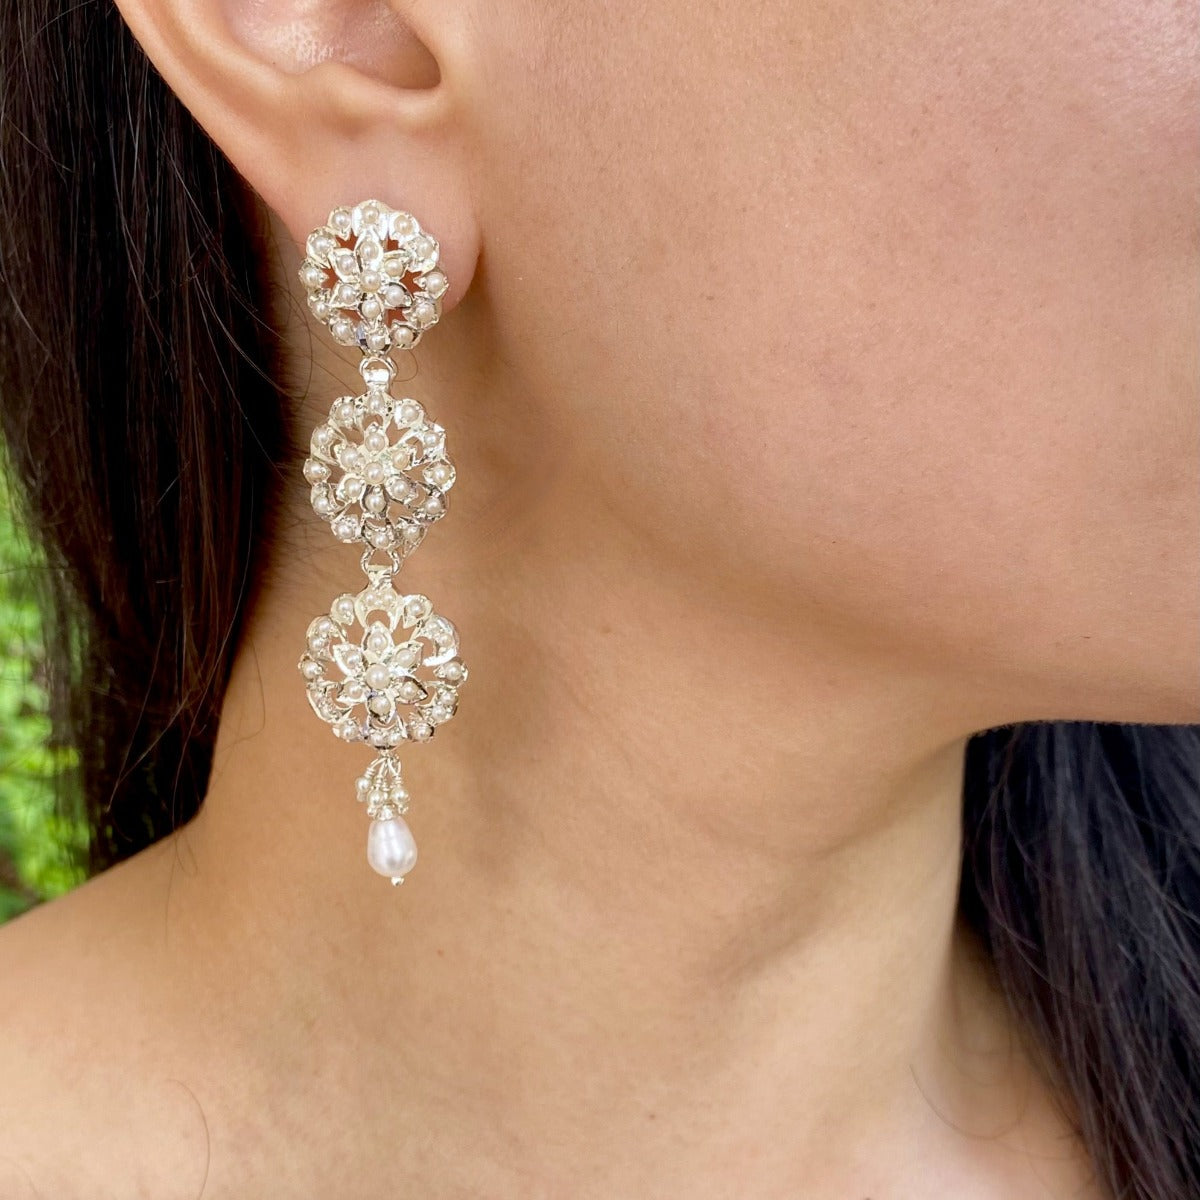 bright silver earrings with pearls